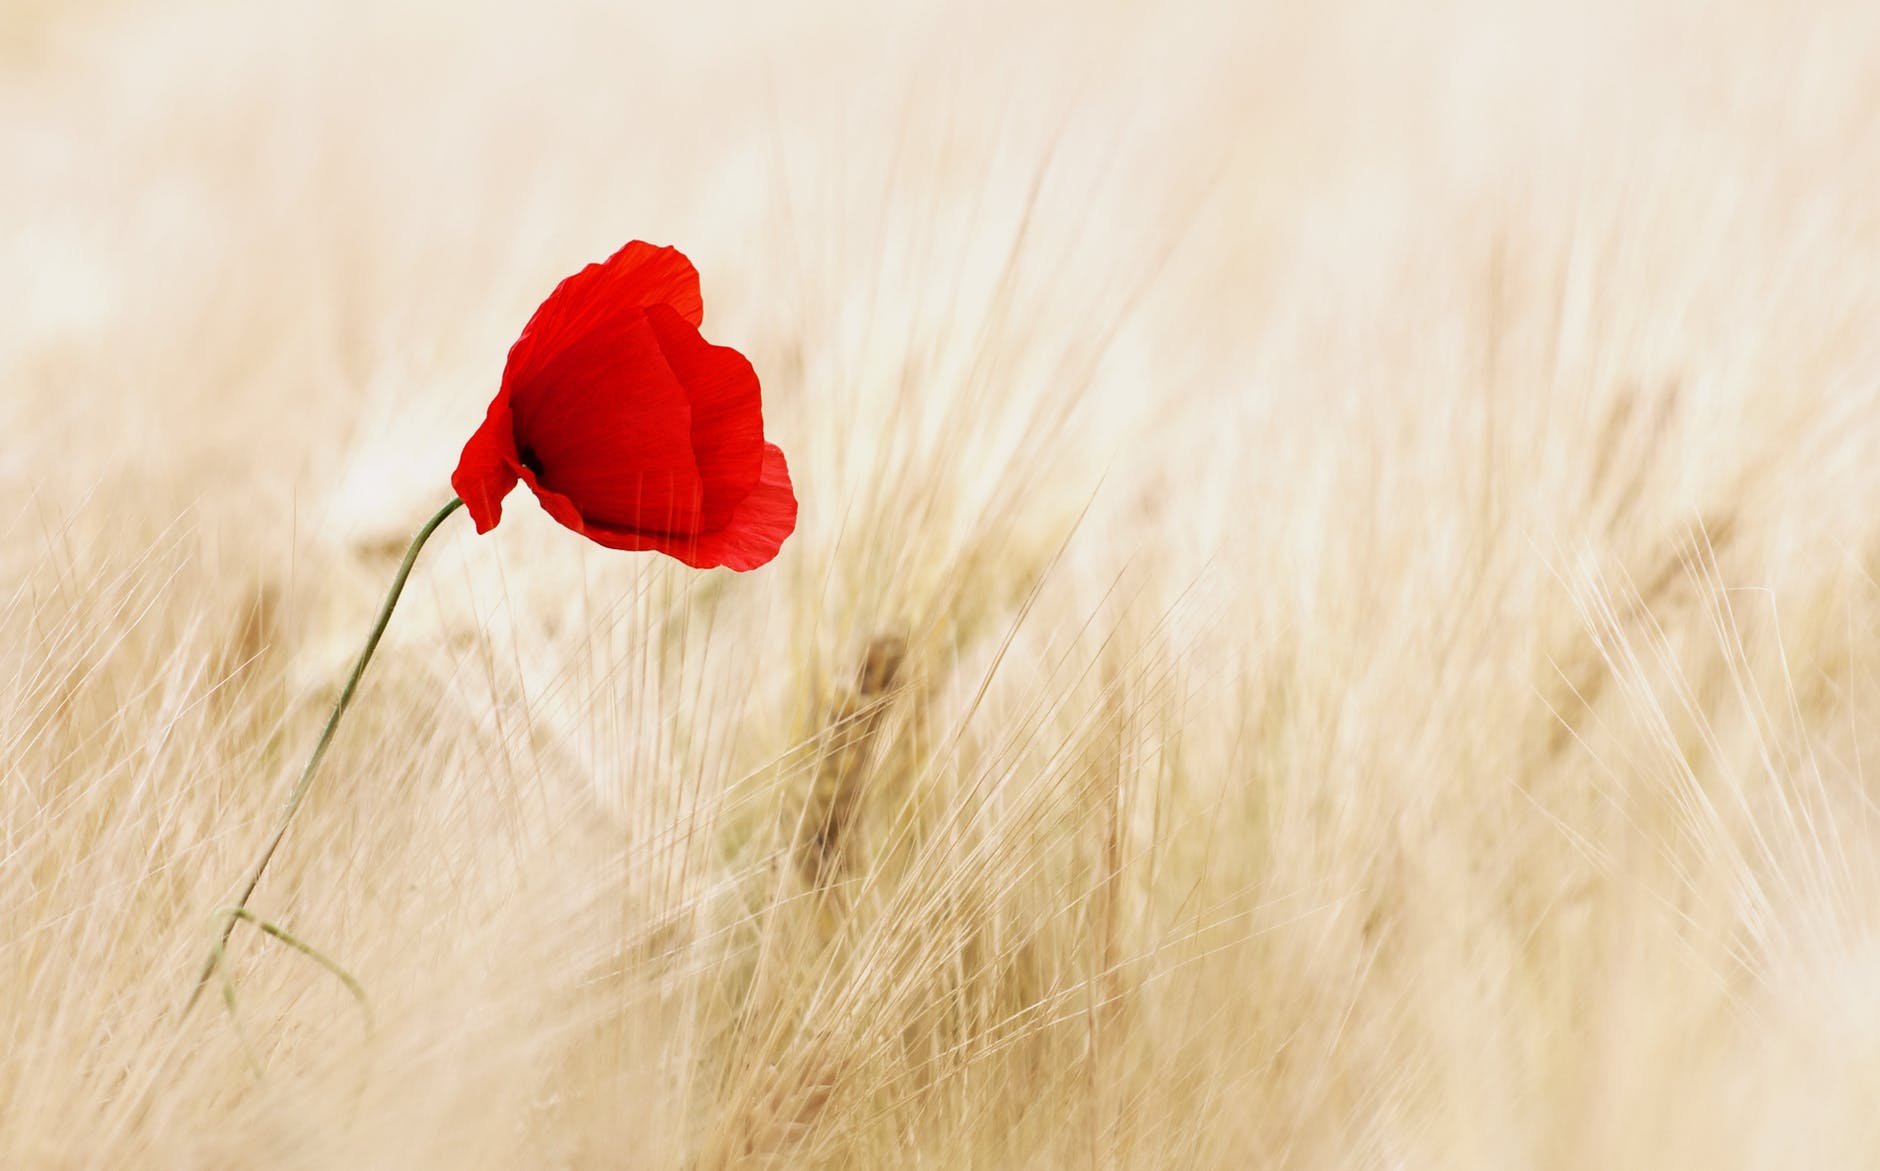 The image is of a poppy flower in a field. I represents how each of us are on our on Simple or Minimalist Living journeys.